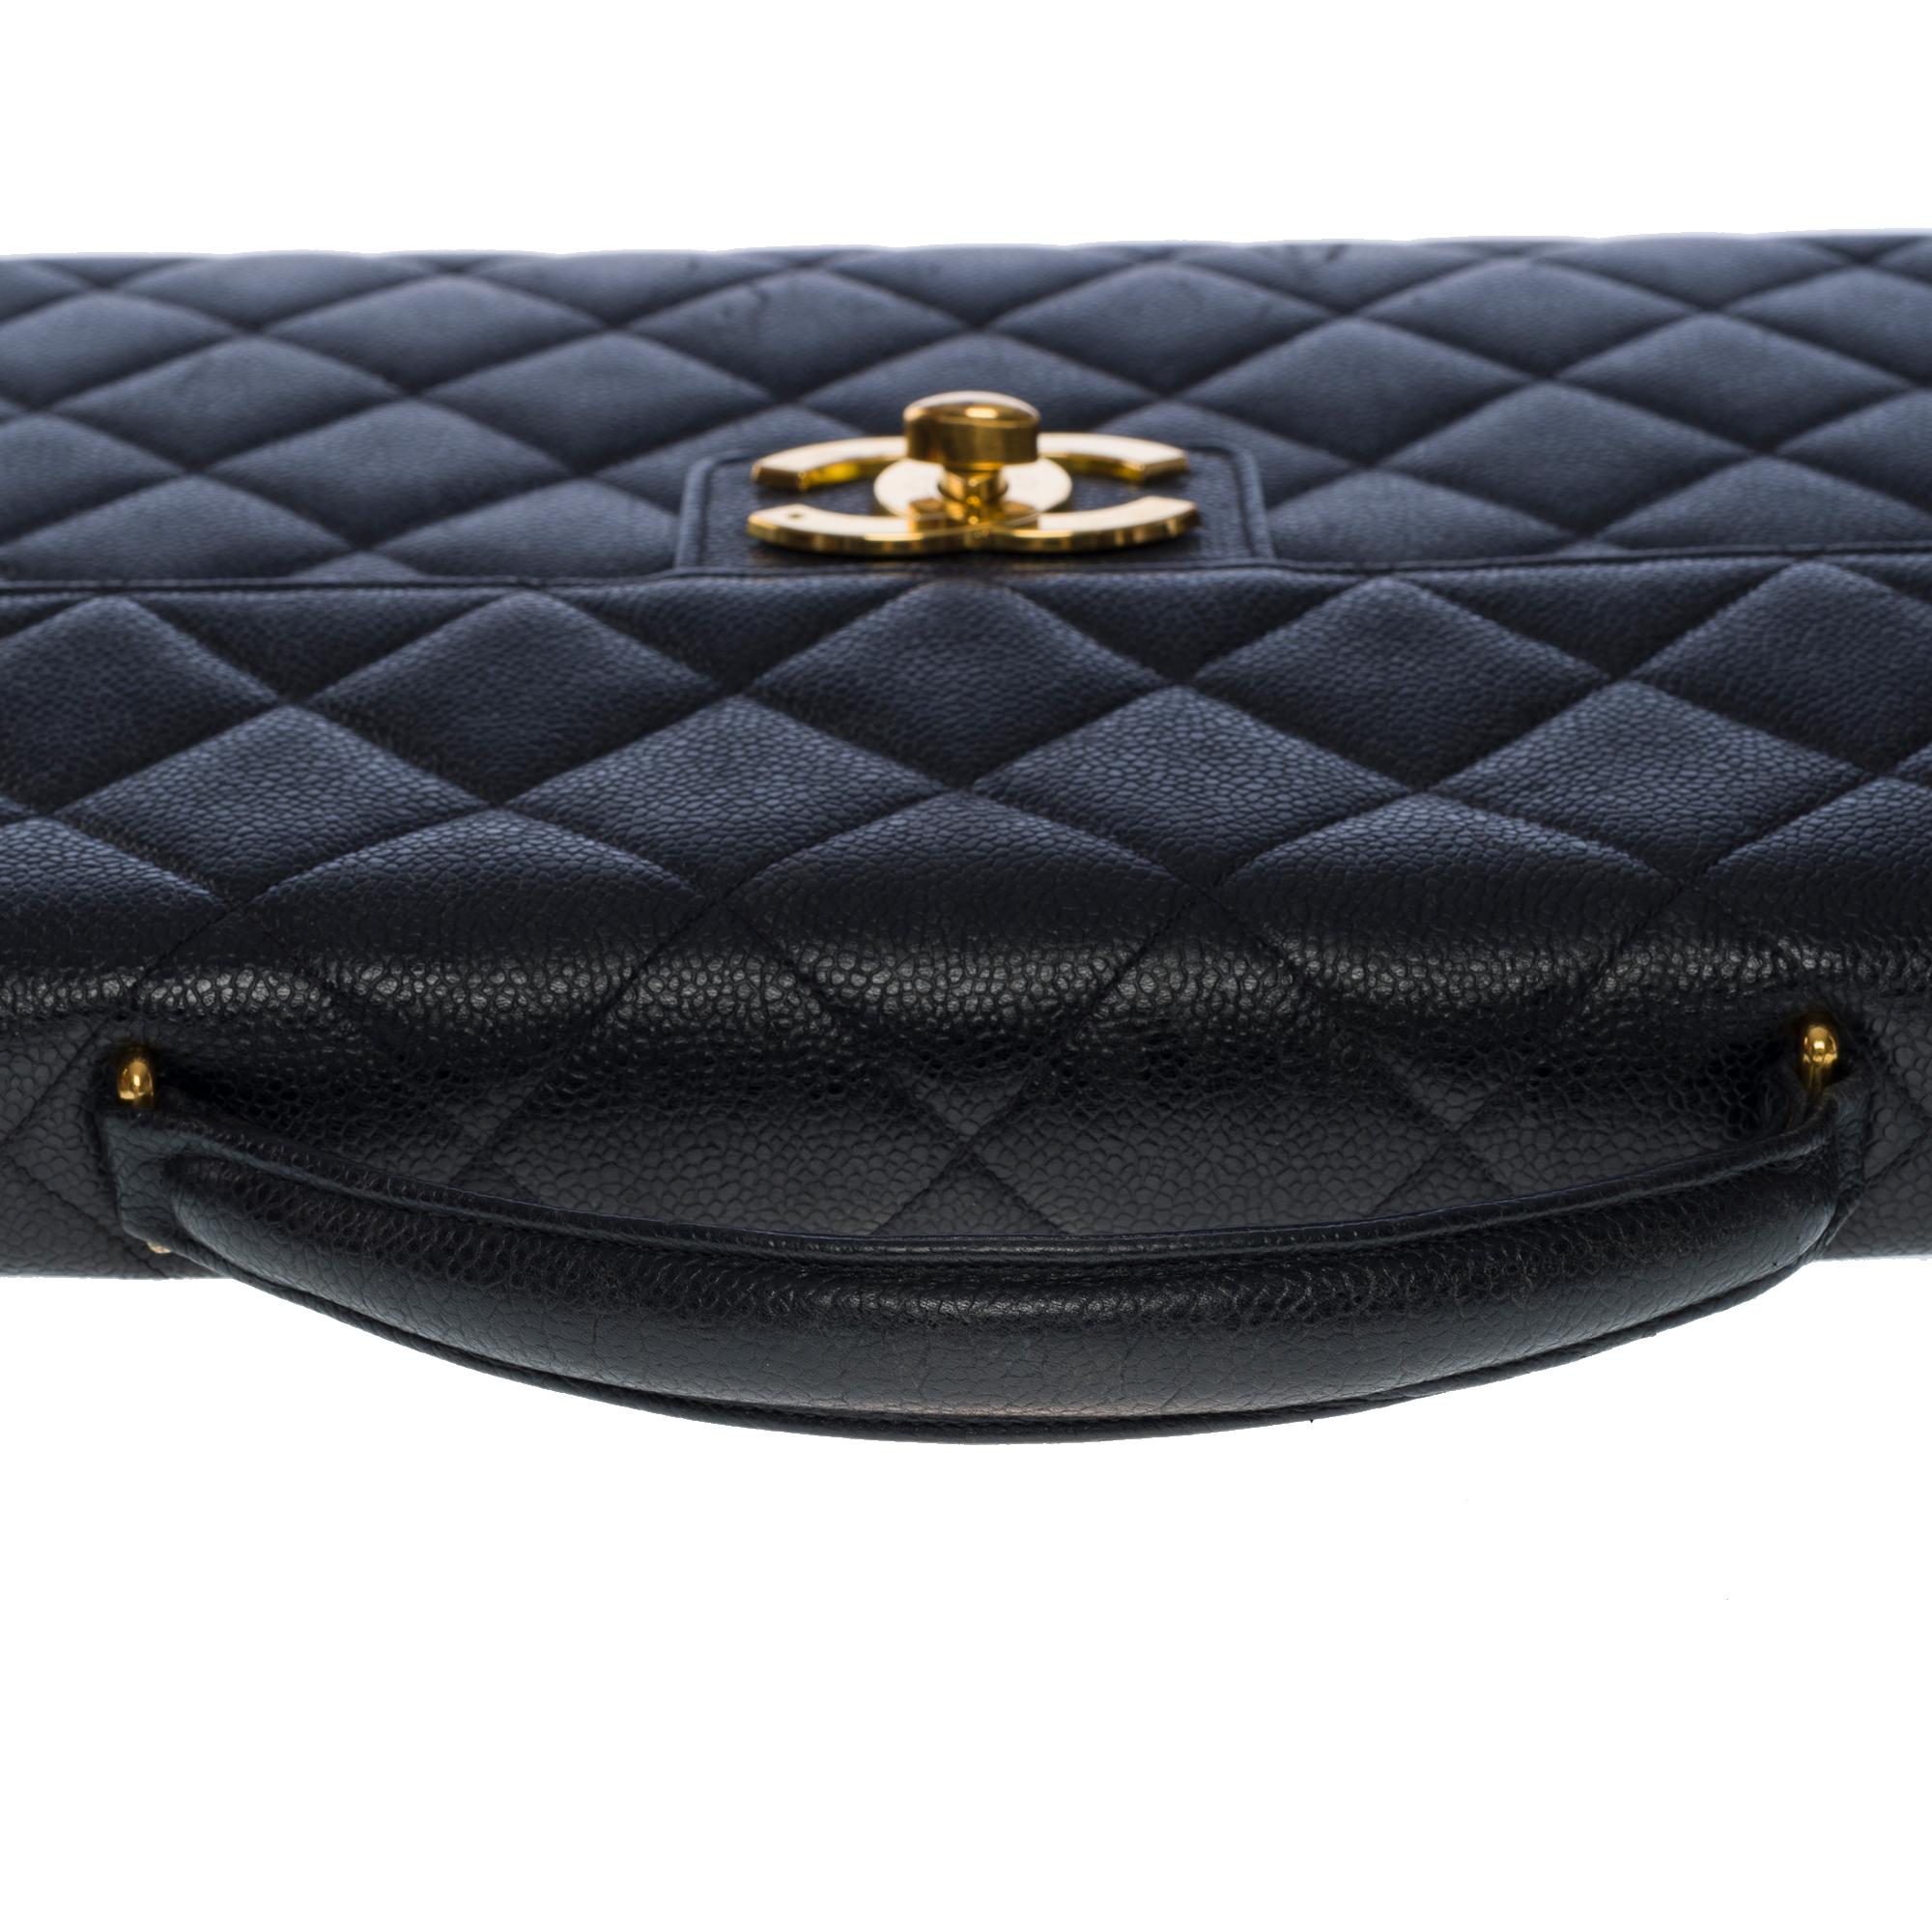 Amazing Chanel vintage Briefcase in black caviar leather, GHW 3